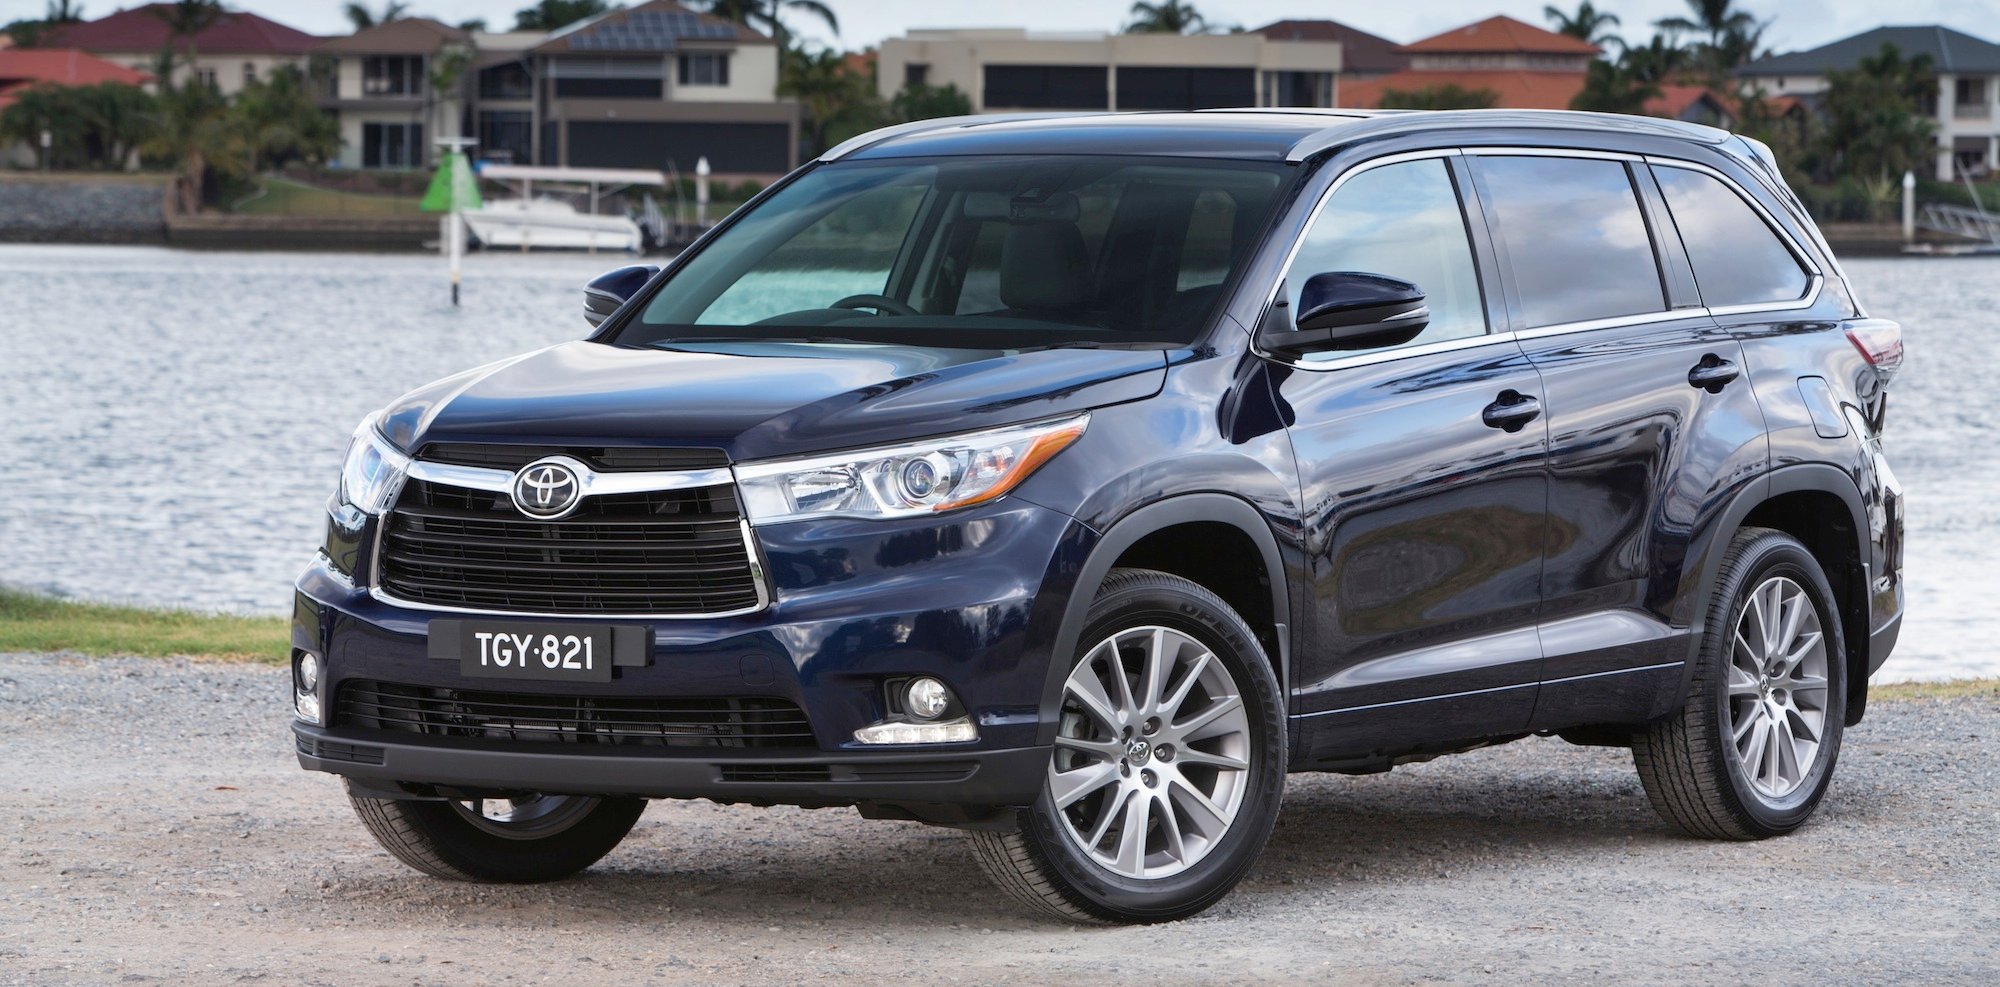 2014 Toyota Kluger : Pricing and specifications - photos ...
